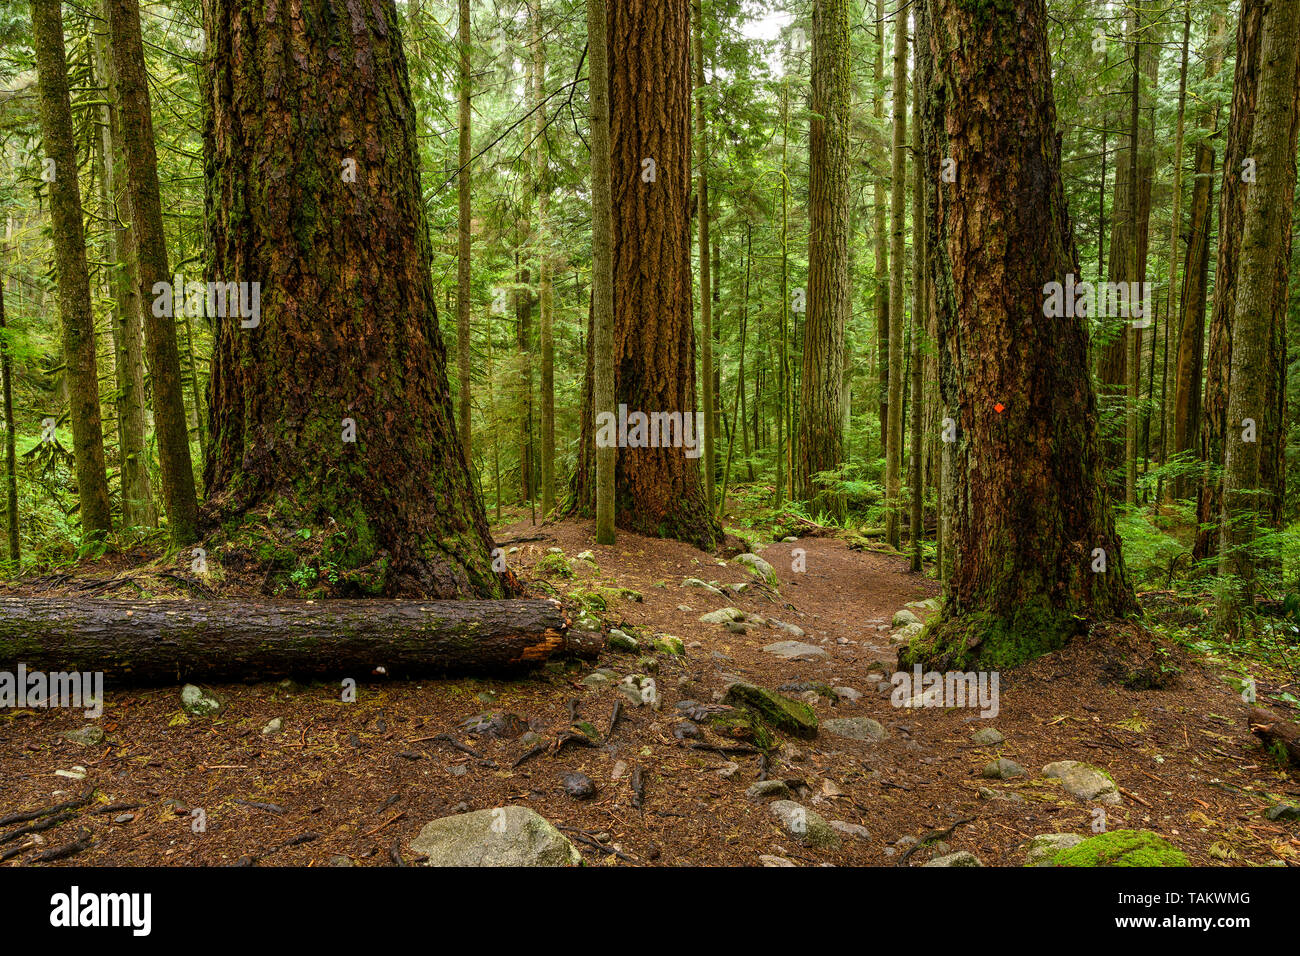 Giant Douglas fir and western red cedar trees covered in a dark rainforest. Cypress Falls Park, West Vancouver, British Columbia, Canada Stock Photo